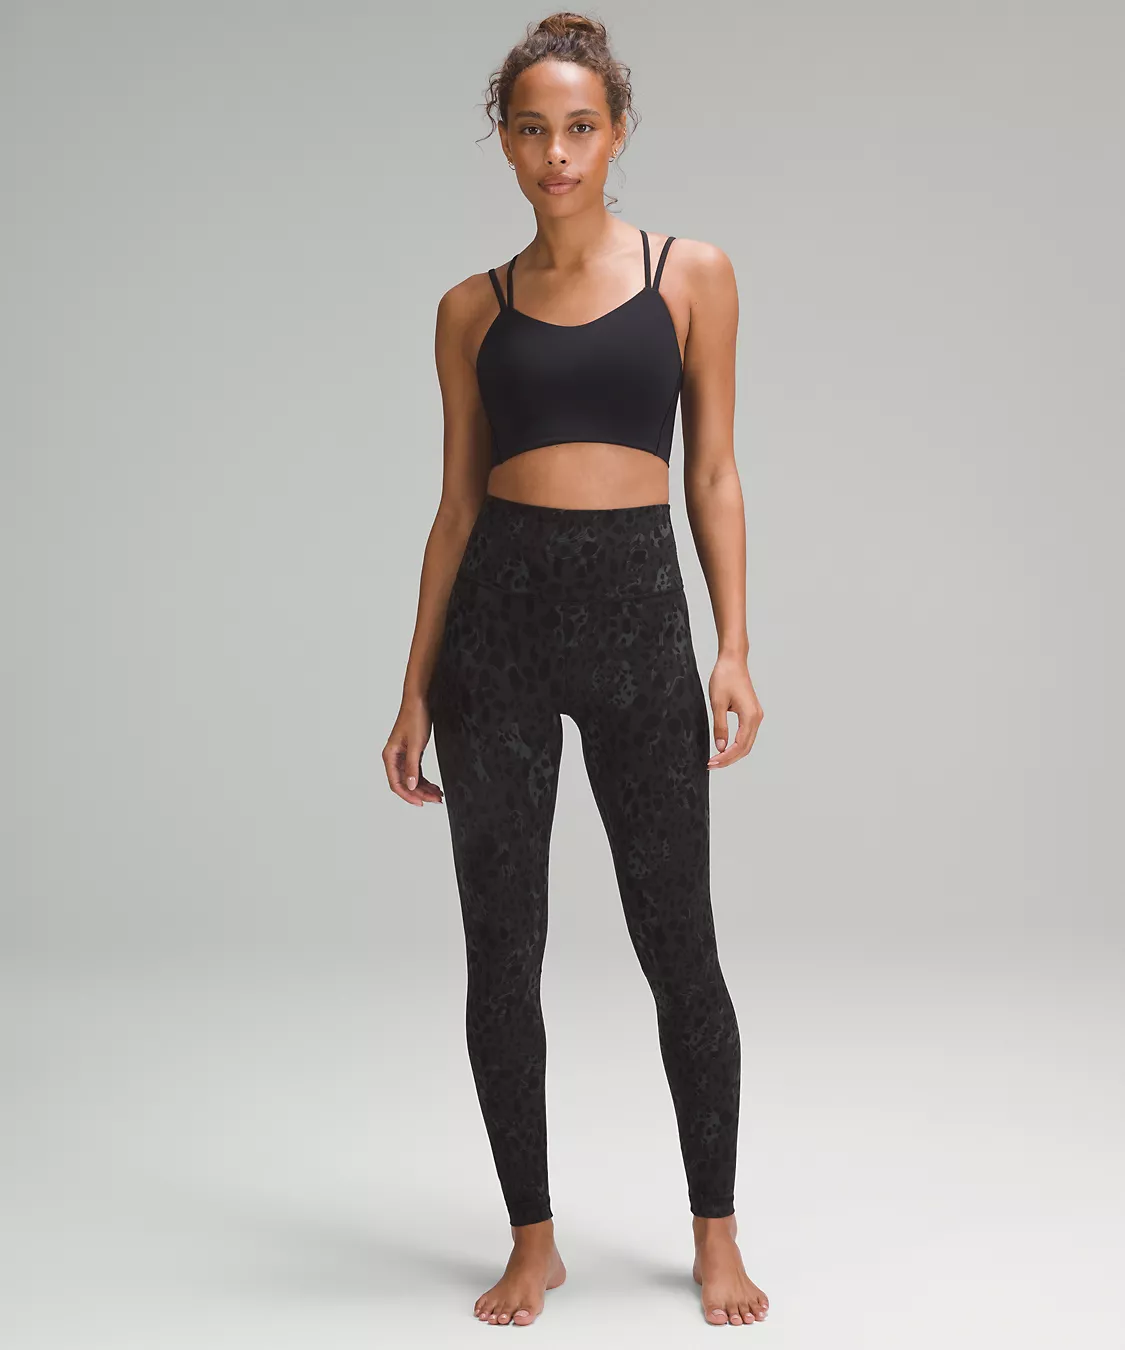 lululemon We Made Too Much Event: Up to 70% off on Select Styles